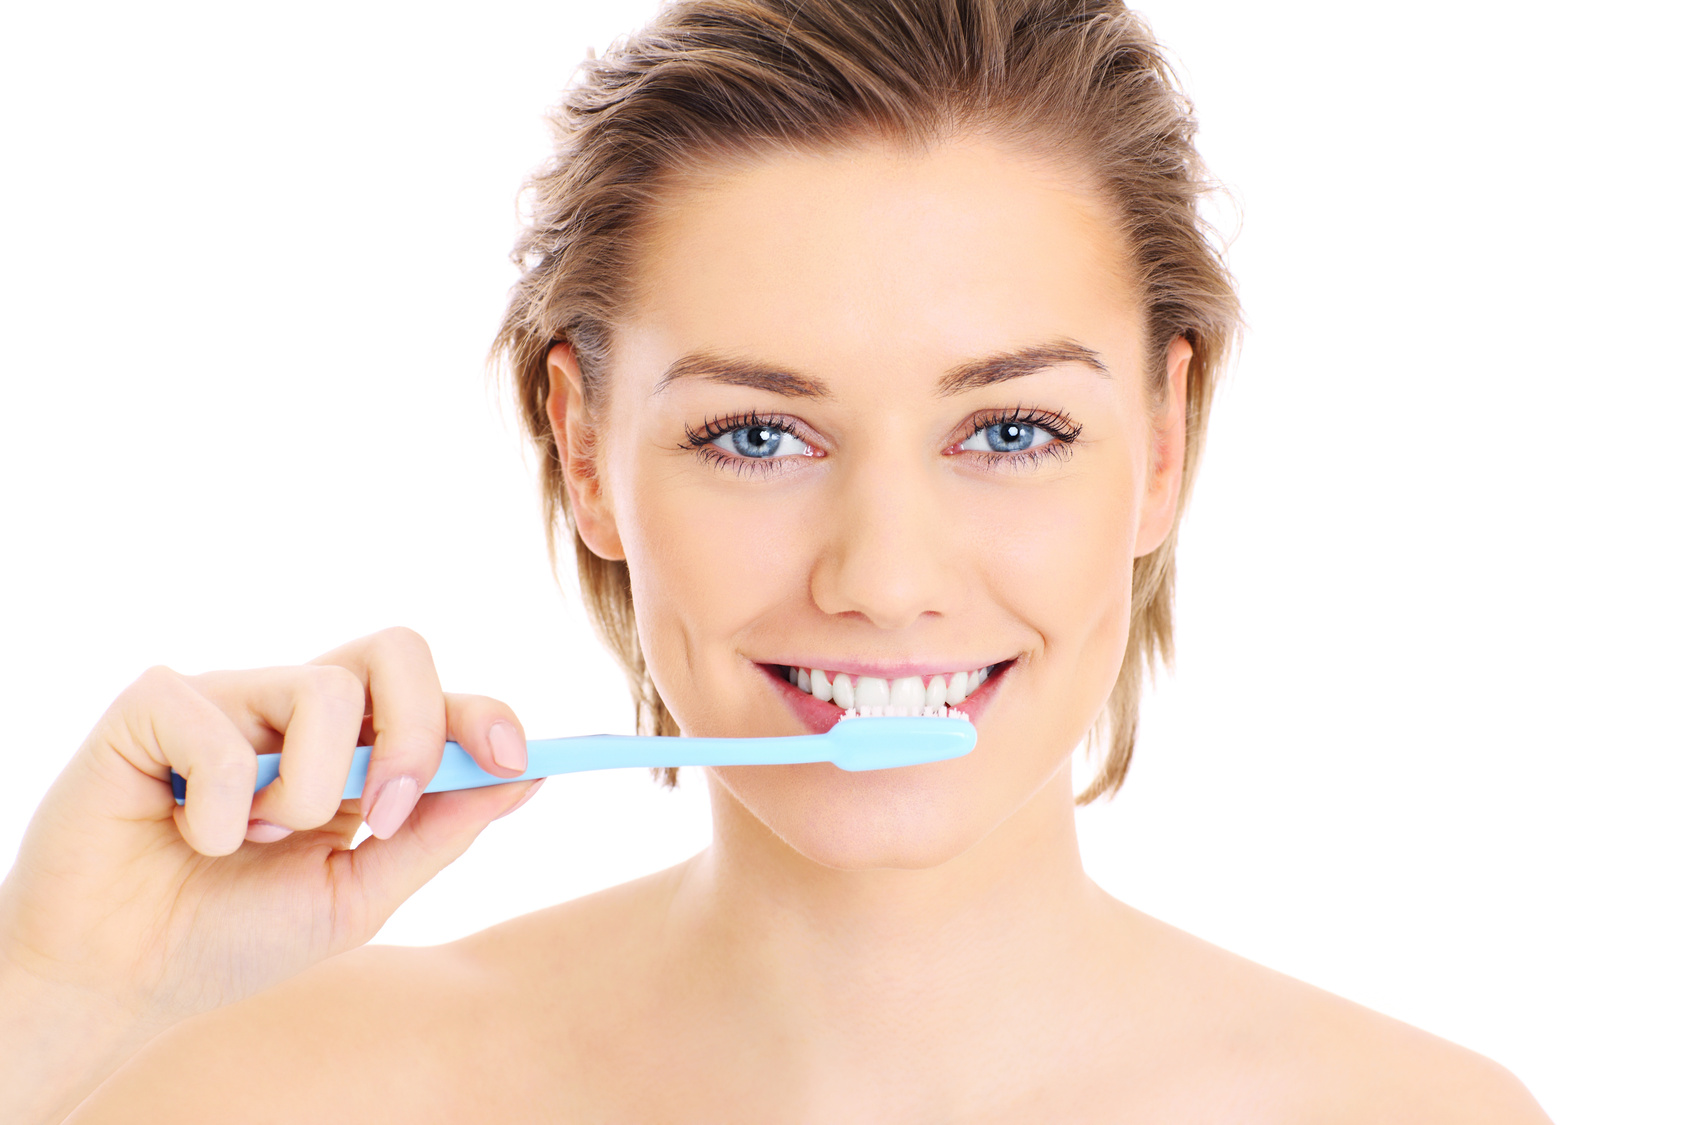 A picture of a young pretty woman brushing her teeth over white background.